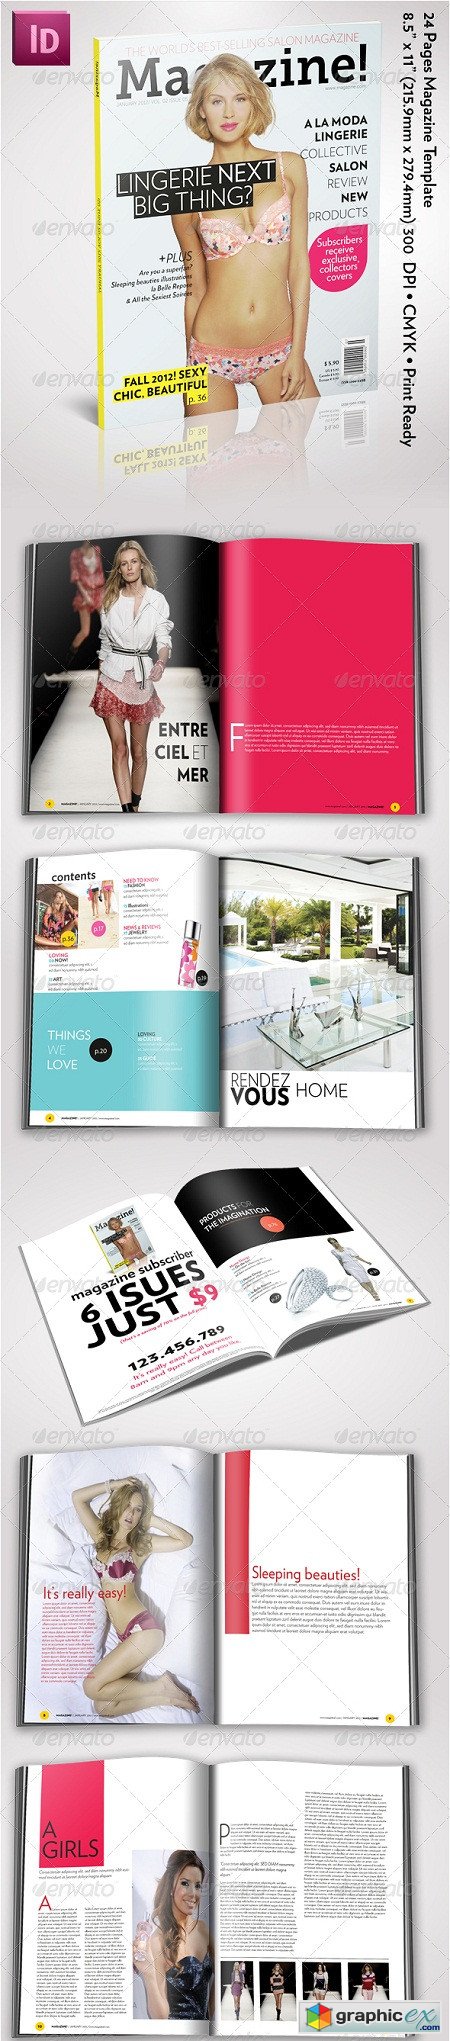 Magazine! 24 Pages InDesign Template